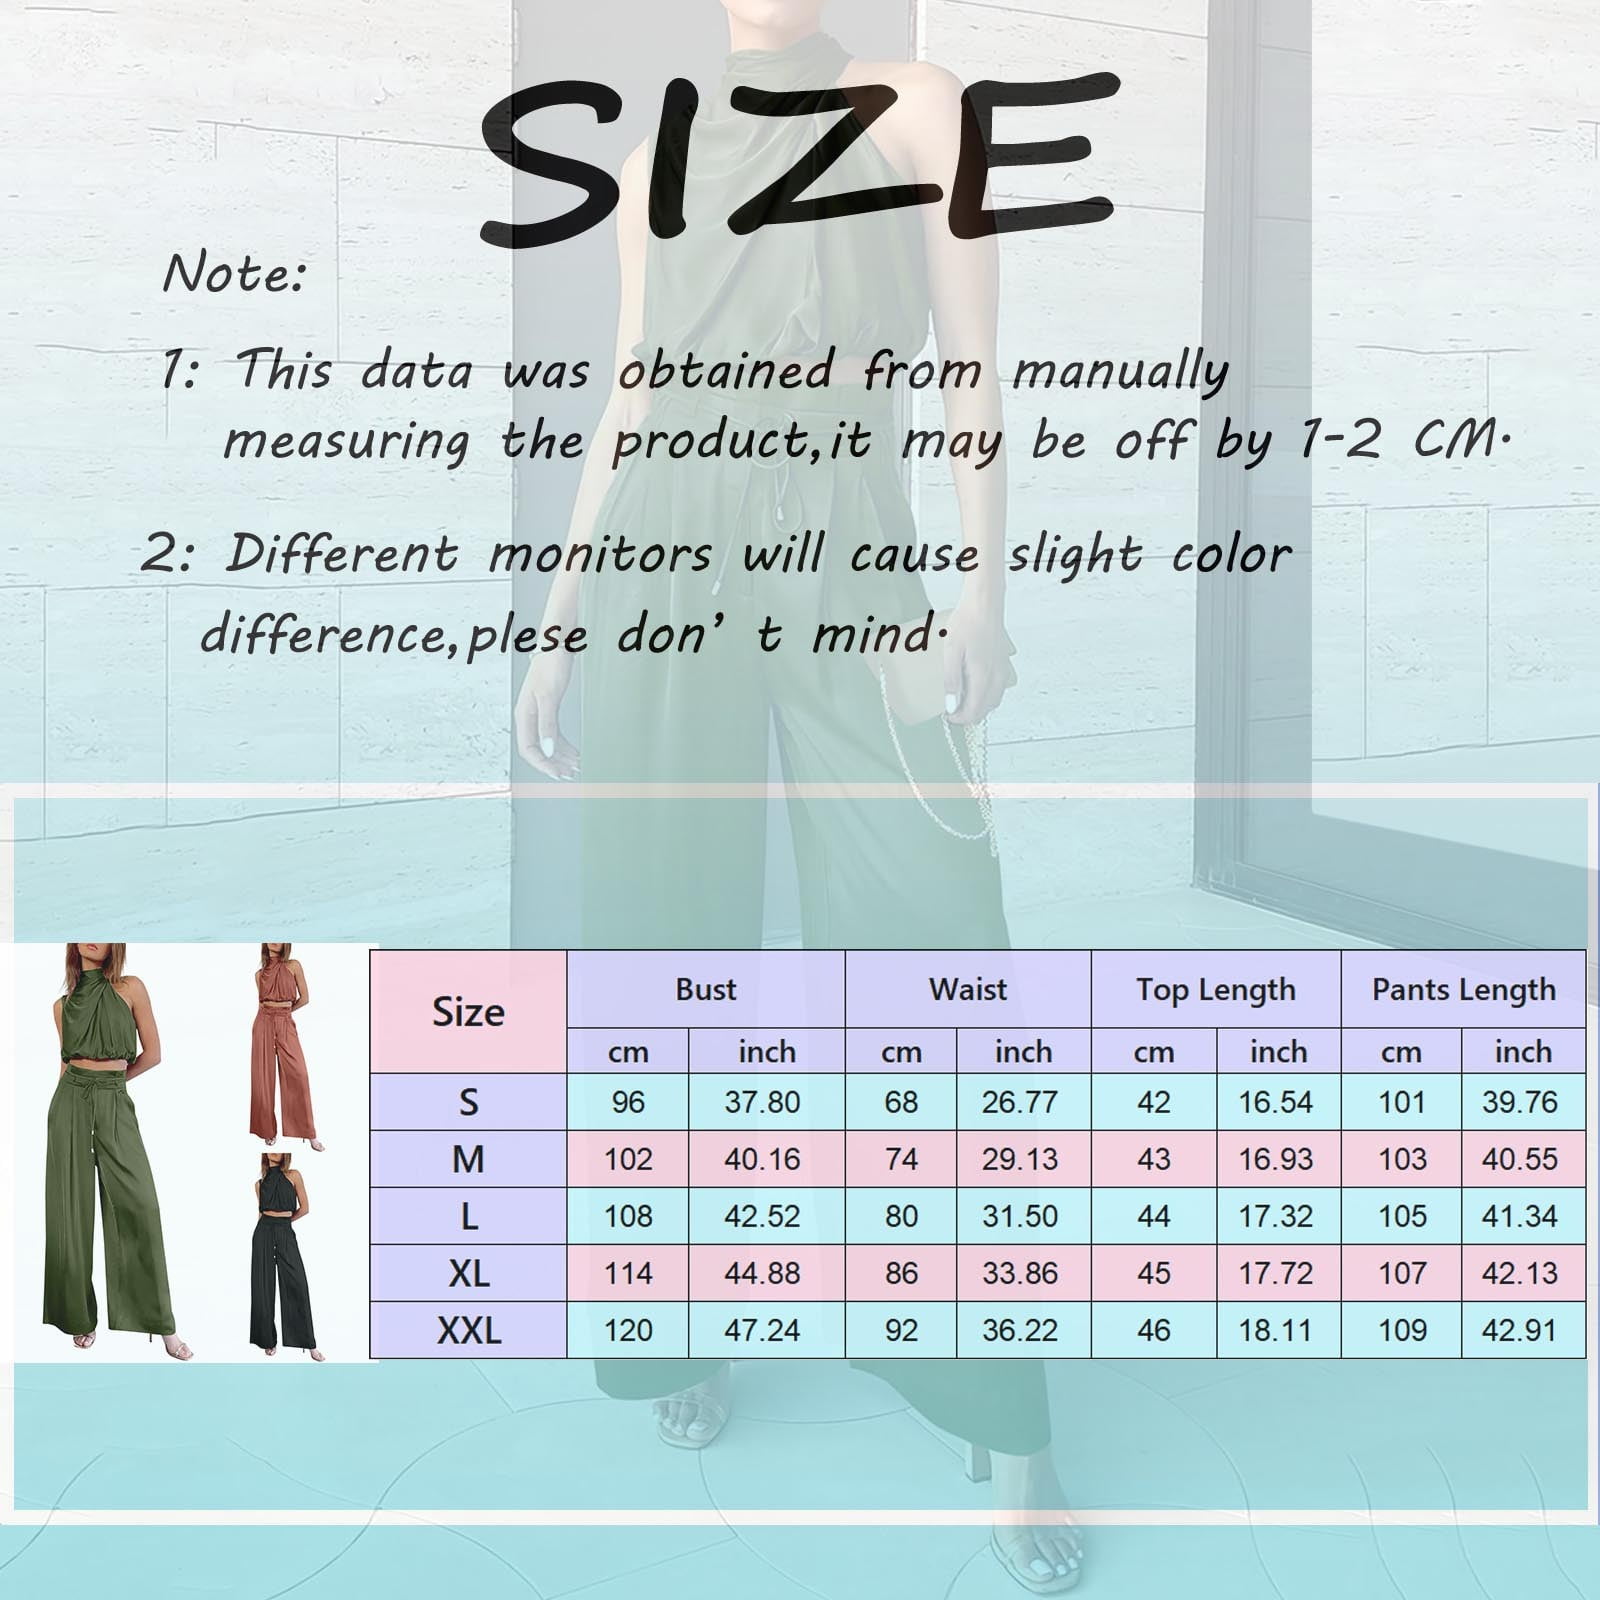 PMUYBHF 70S Outfits for Women Tops Women 2 Piece Outfits Summer Casual  Sleeveless neck Crop Tops Wide Leg Pants Set Birthday Outfits for Women  Jumpsuit Short 